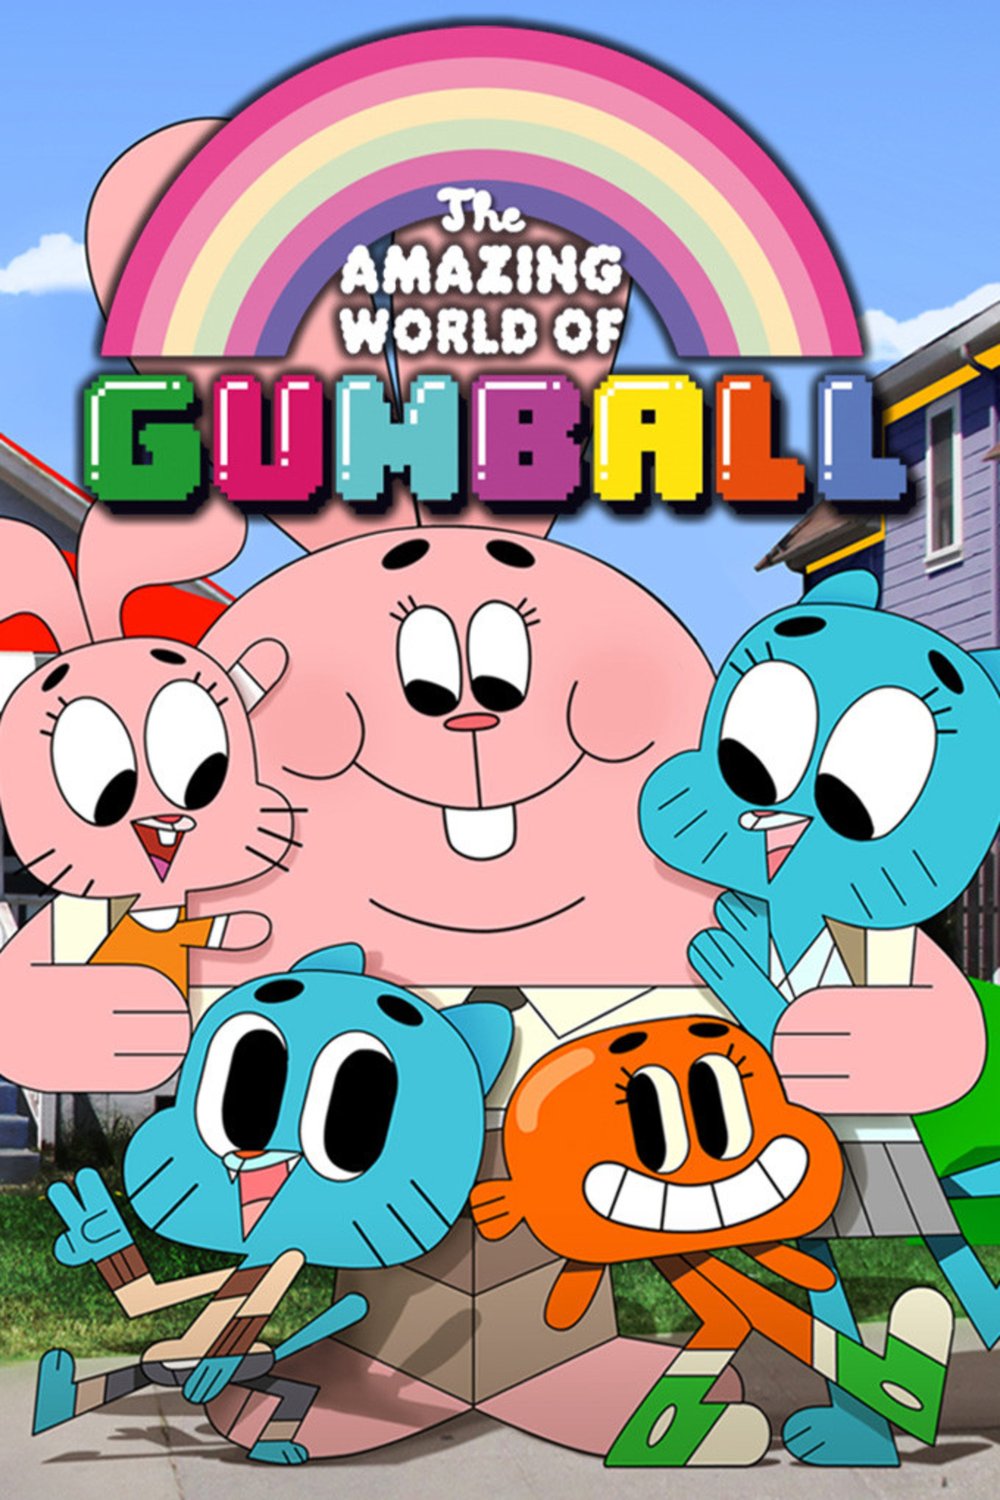 L'affiche du film The Amazing World of Gumball